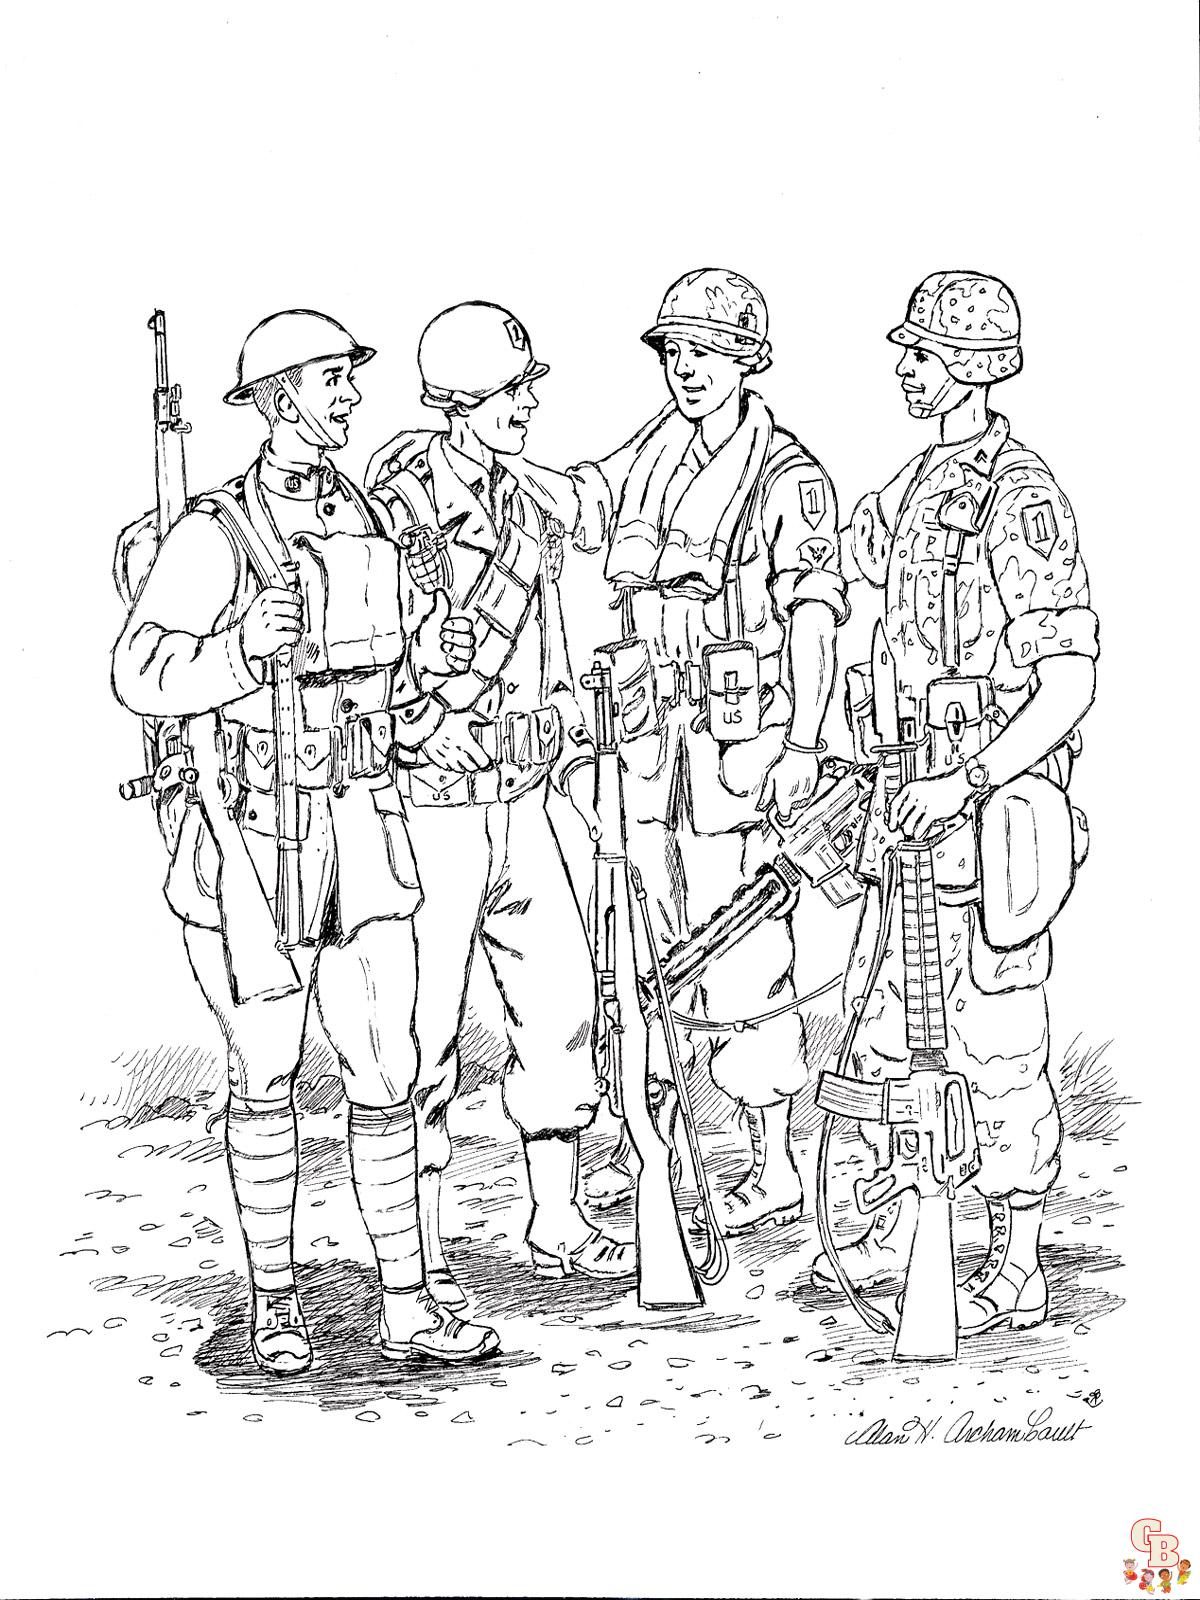 Get creative with army coloring pages for kids